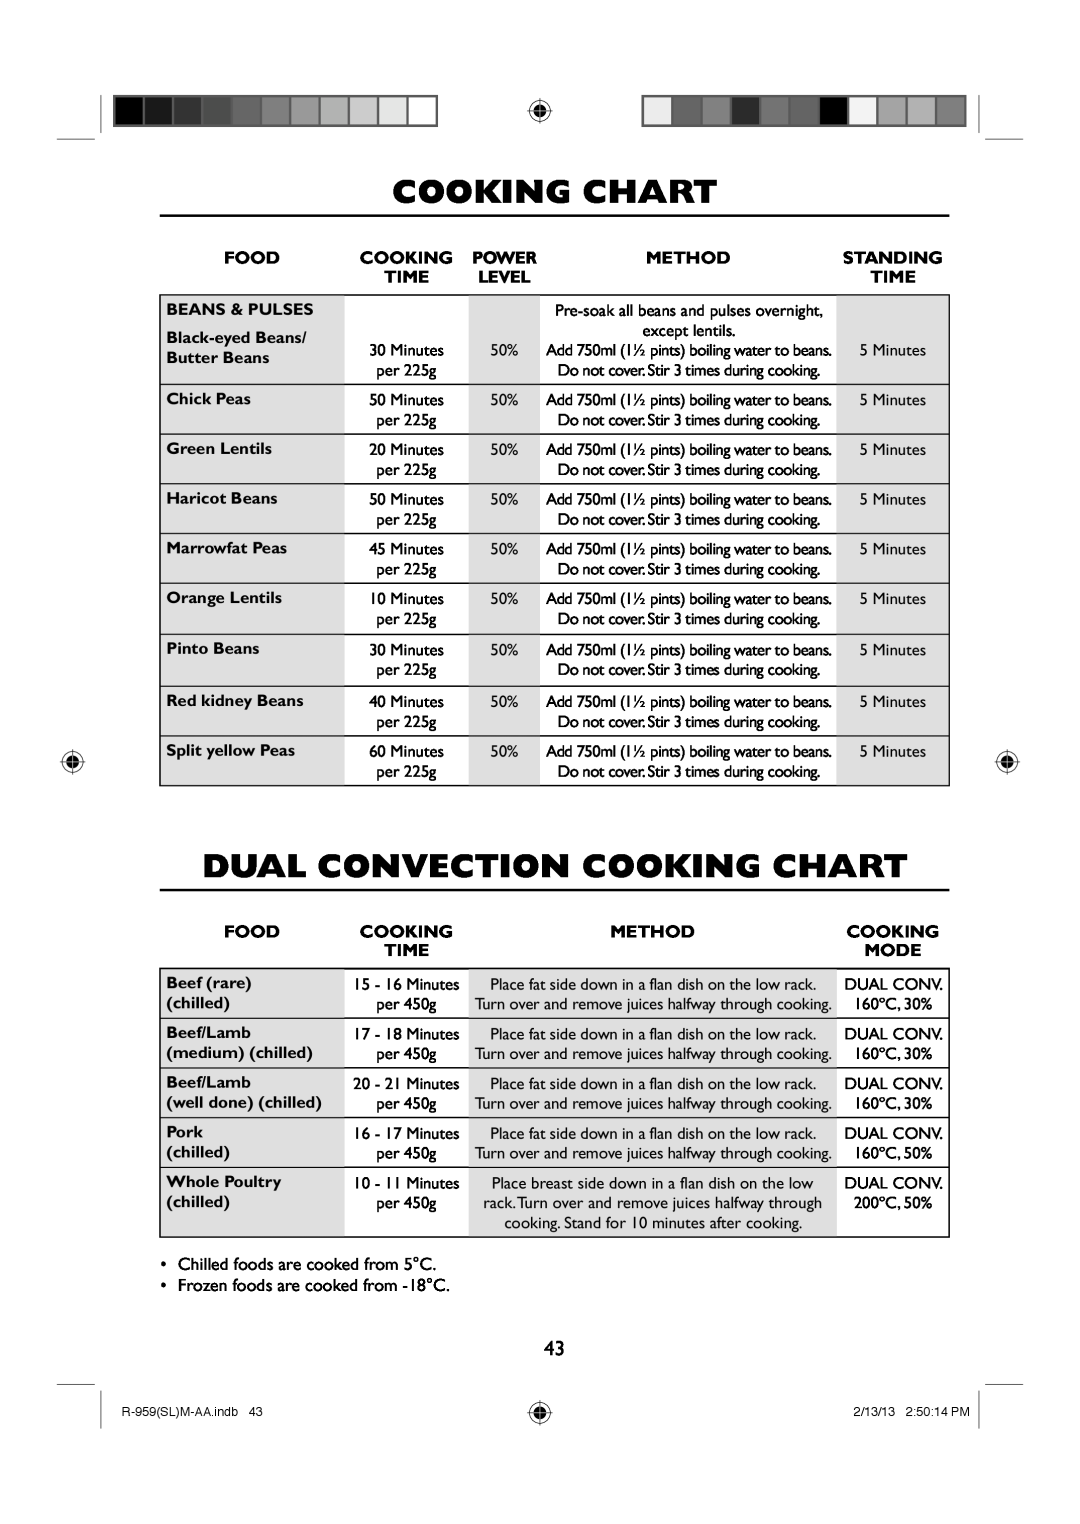 Sharp R-959(SL)M-AA Dual Convection Cooking Chart, Food, Power, Method, Standing, Time, Beans & Pulses, Black-eyed Beans 